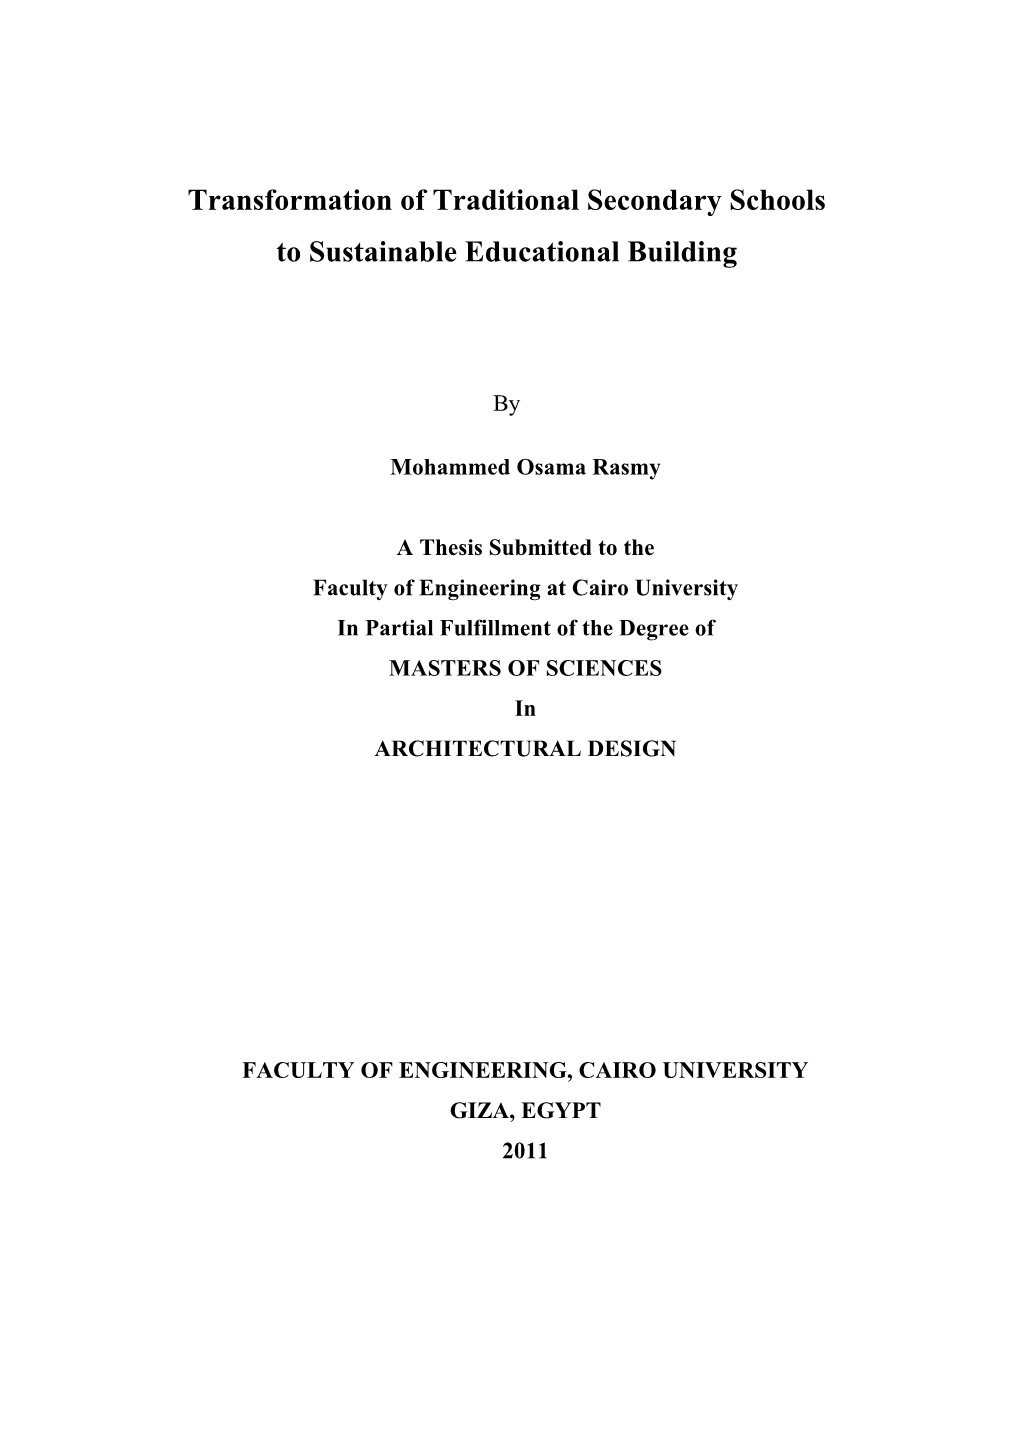 Transformation of Traditional Secondary Schools to Sustainable Educational Building